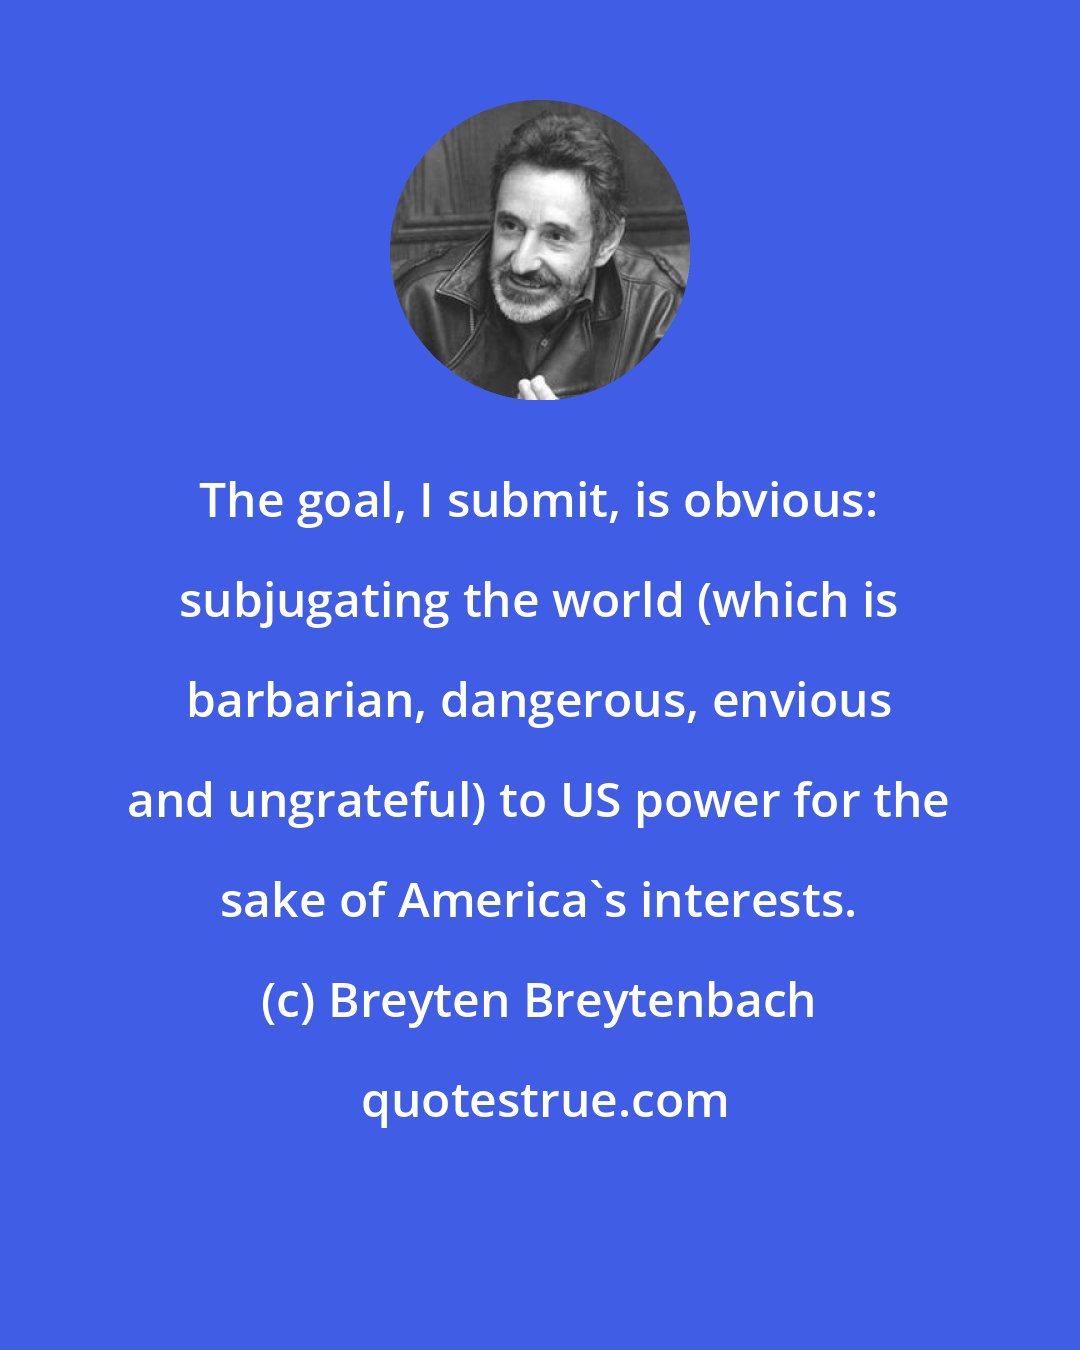 Breyten Breytenbach: The goal, I submit, is obvious: subjugating the world (which is barbarian, dangerous, envious and ungrateful) to US power for the sake of America's interests.